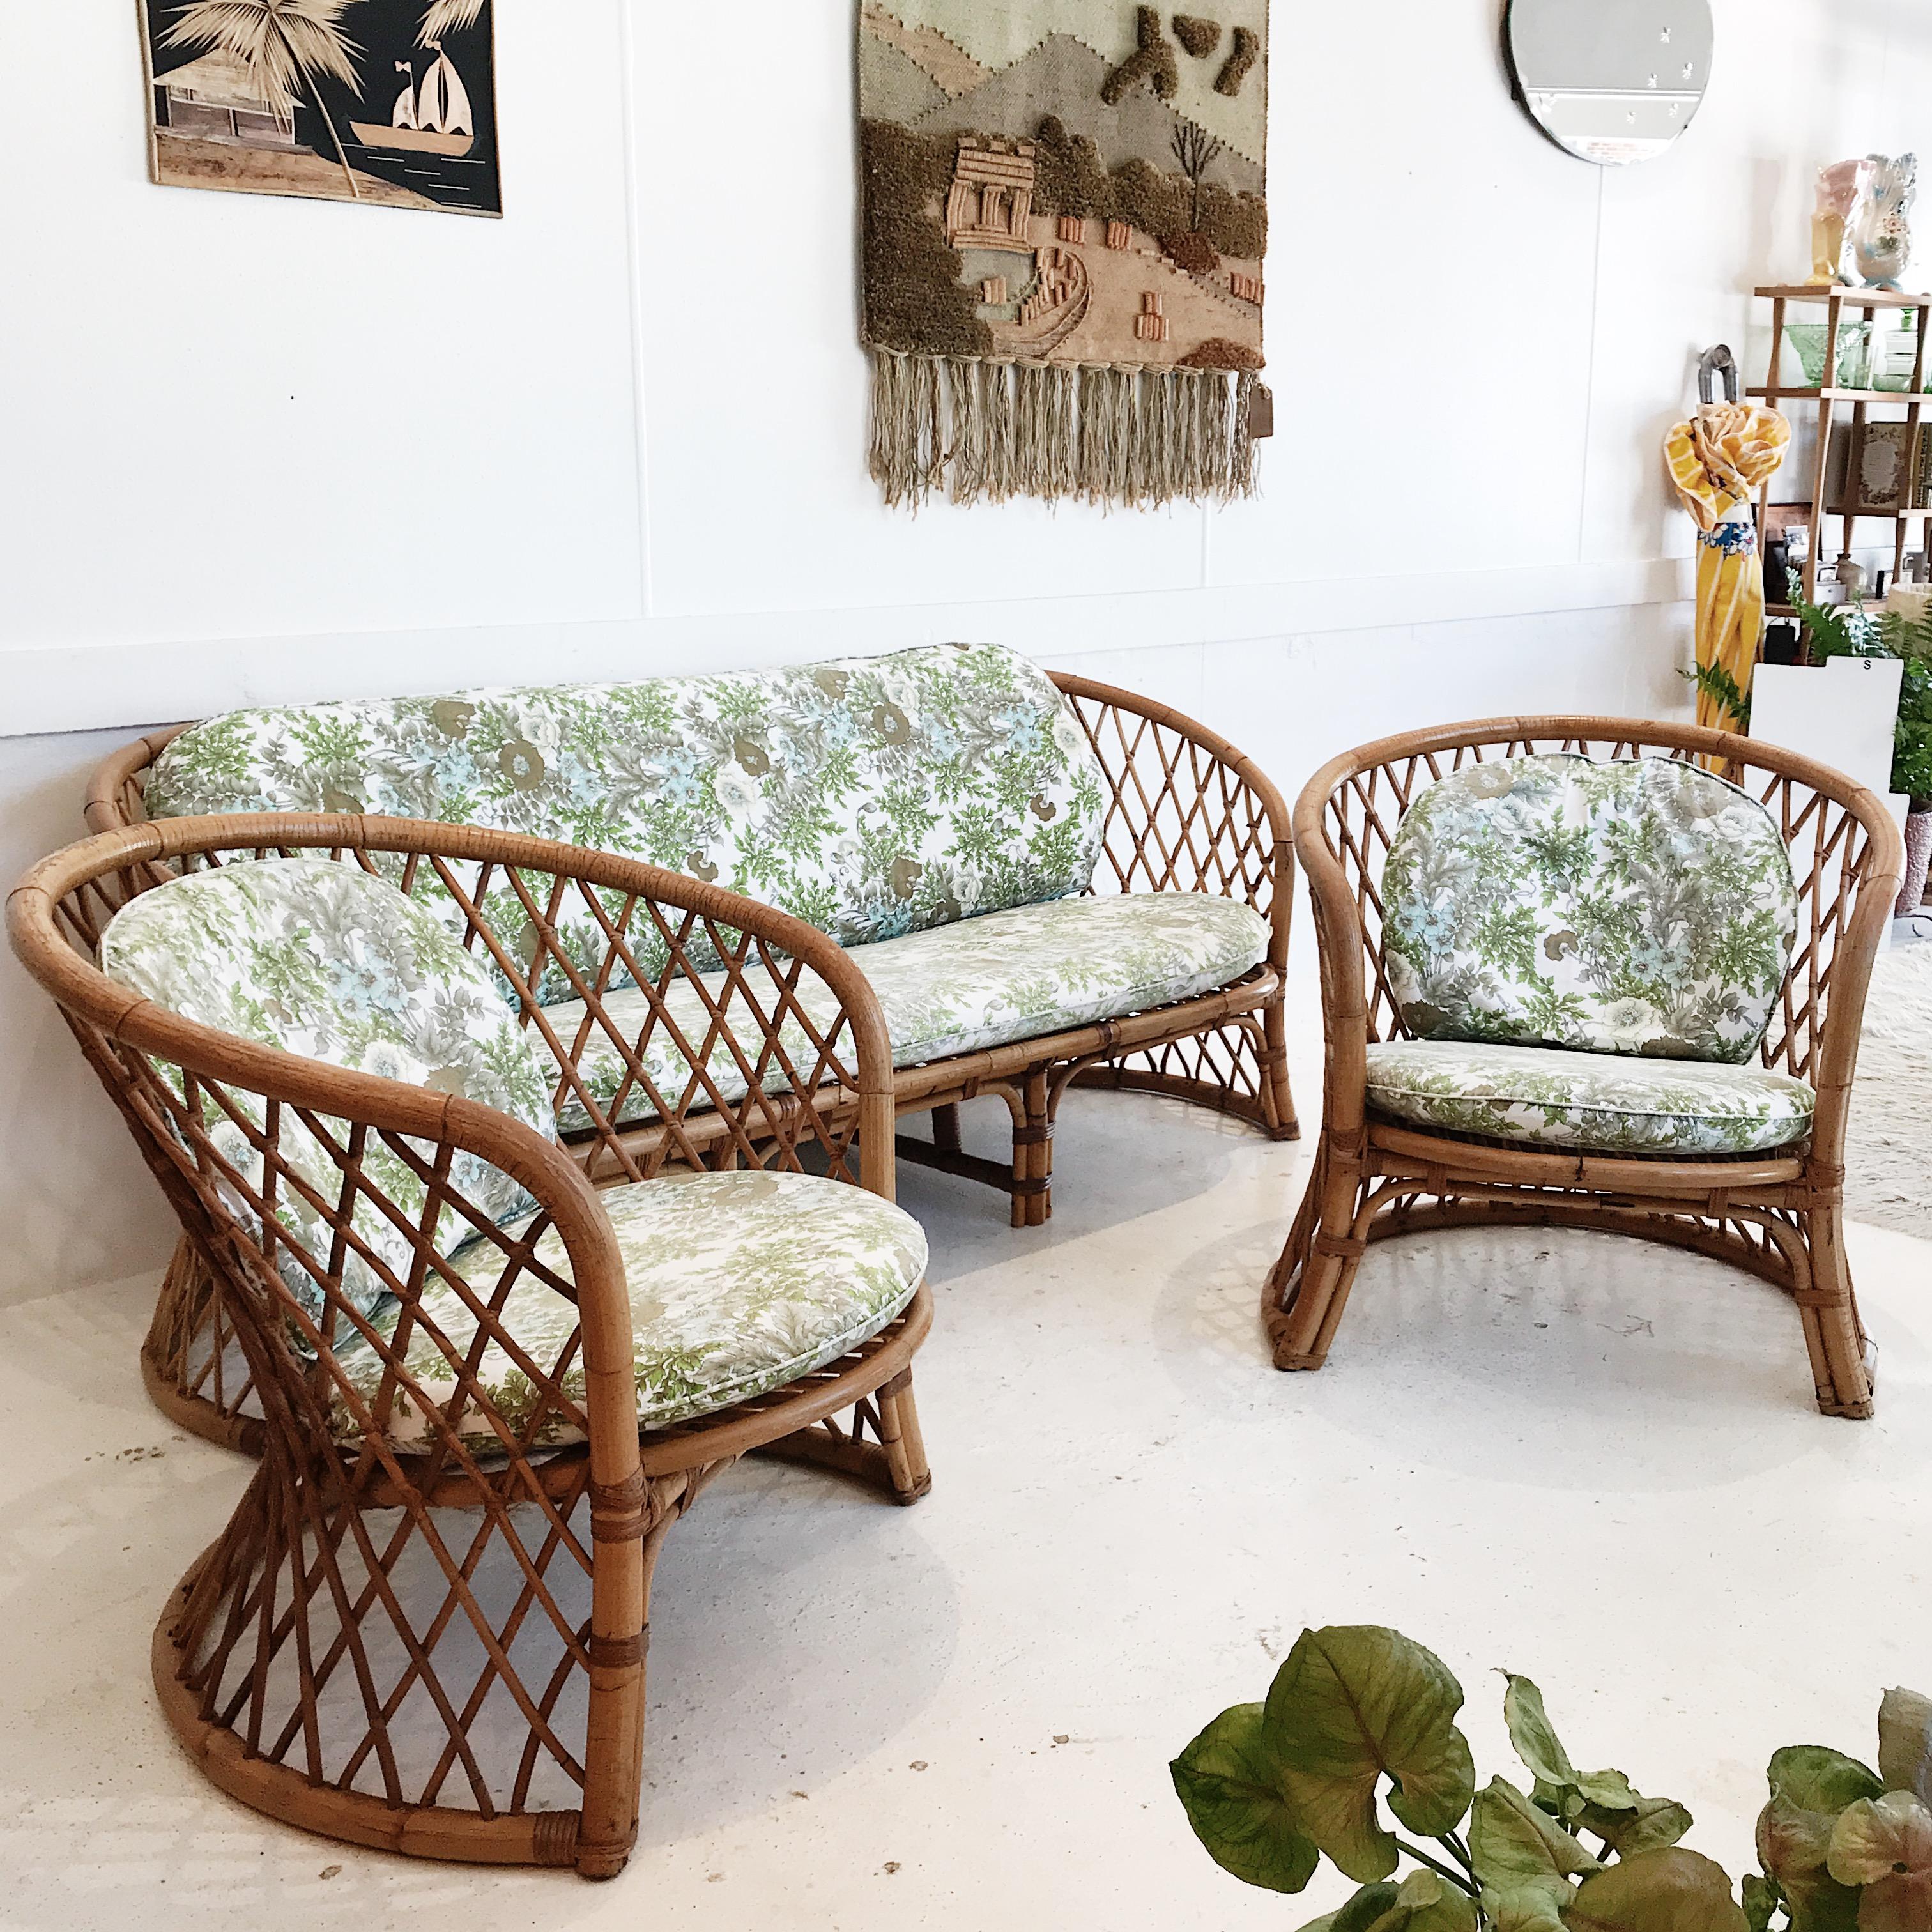 Australian midcentury three-piece rattan lounge suite with lovely, original cotton cushion covers. Fabric features liberty style, native floral pattern, in tea, olive green, and baby blue.

This set is in marvellous visual and structural